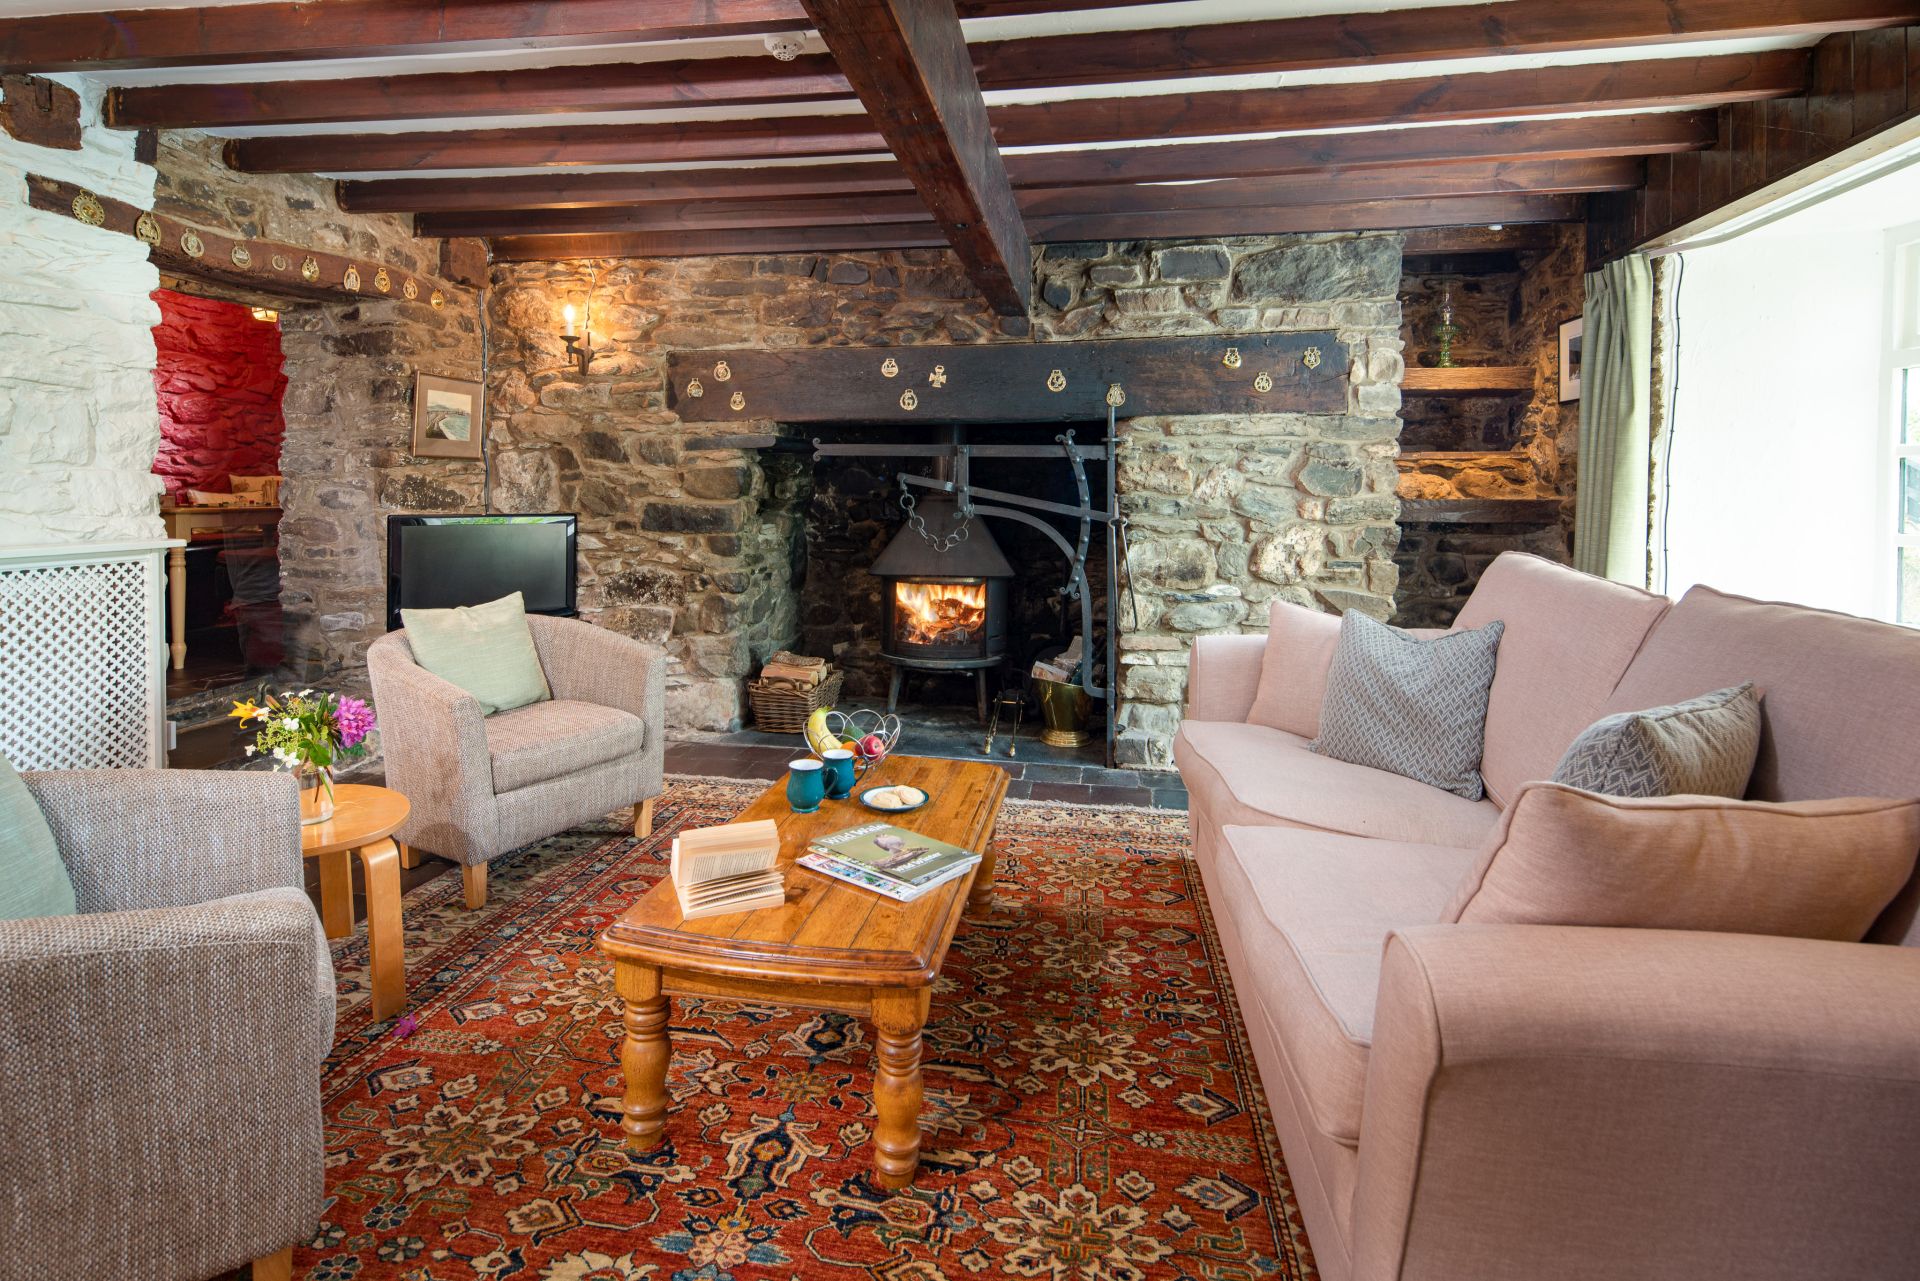 Relax and unwind in front of a log fire